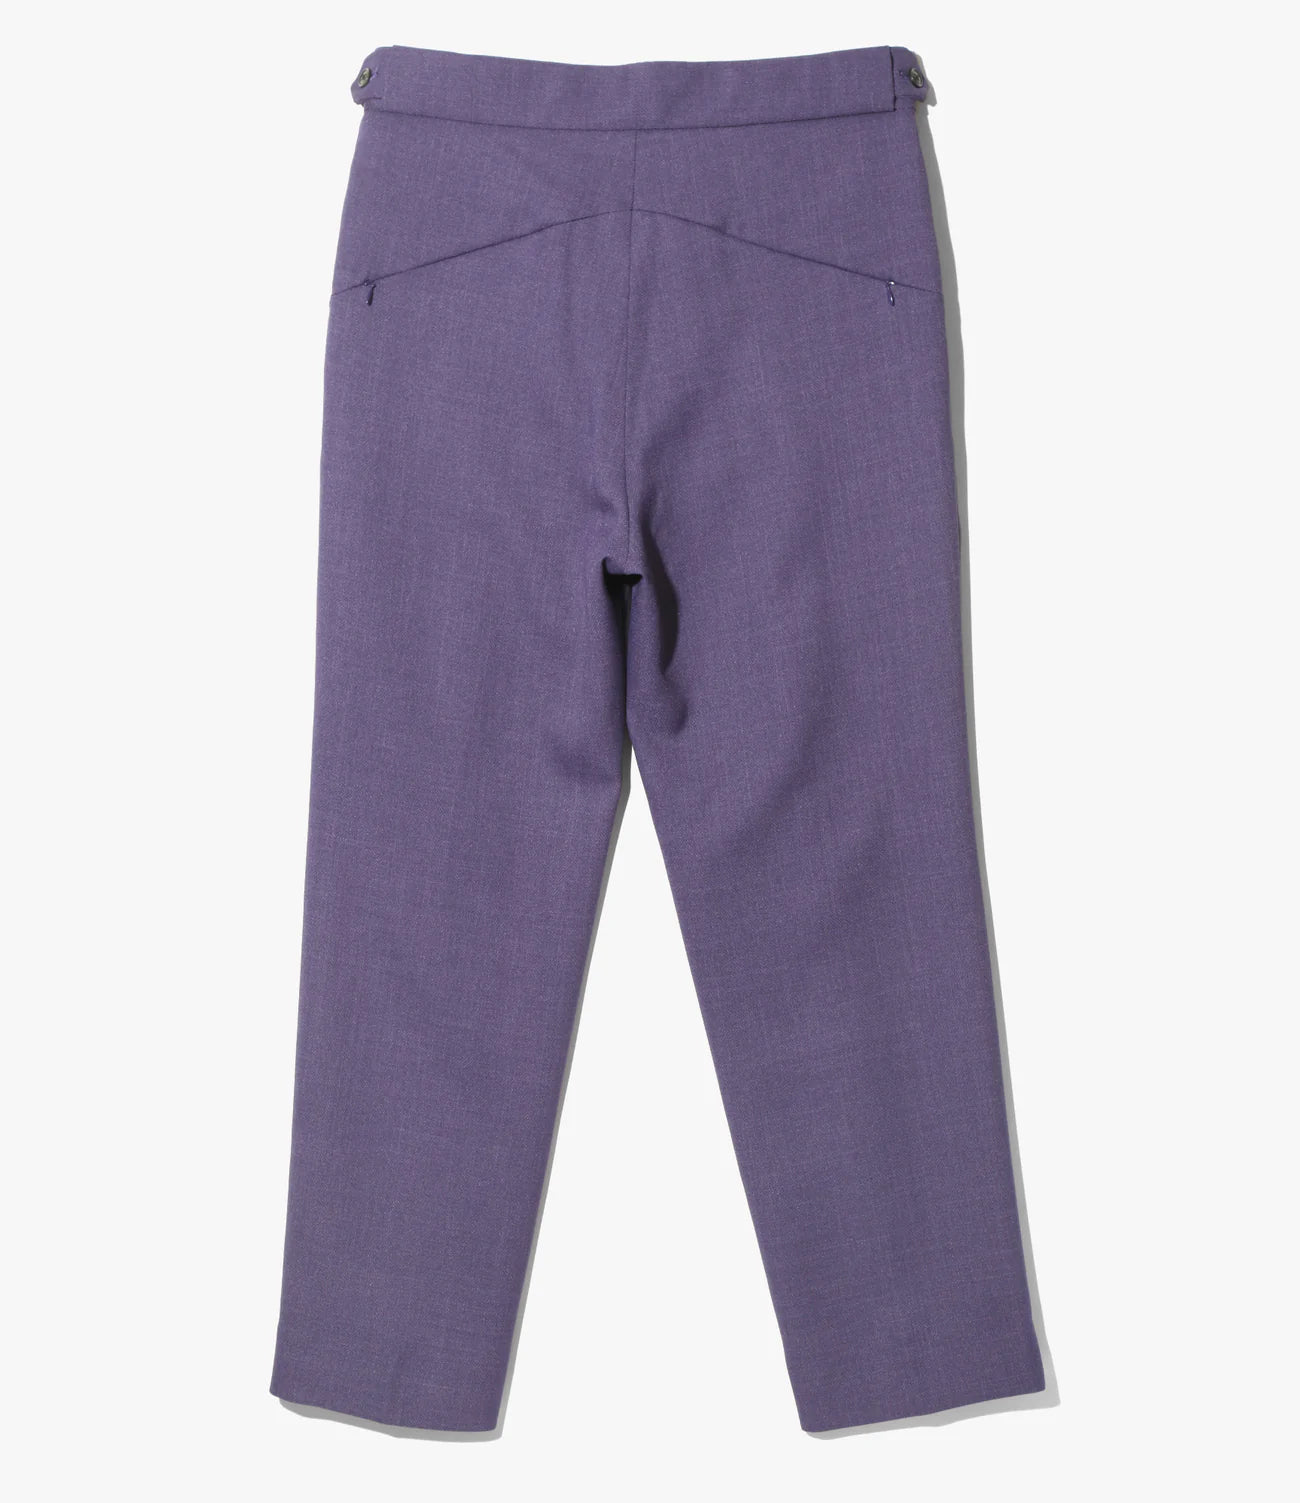 Needles Tucked Side Tab Trouser - Poly Dobby Cloth